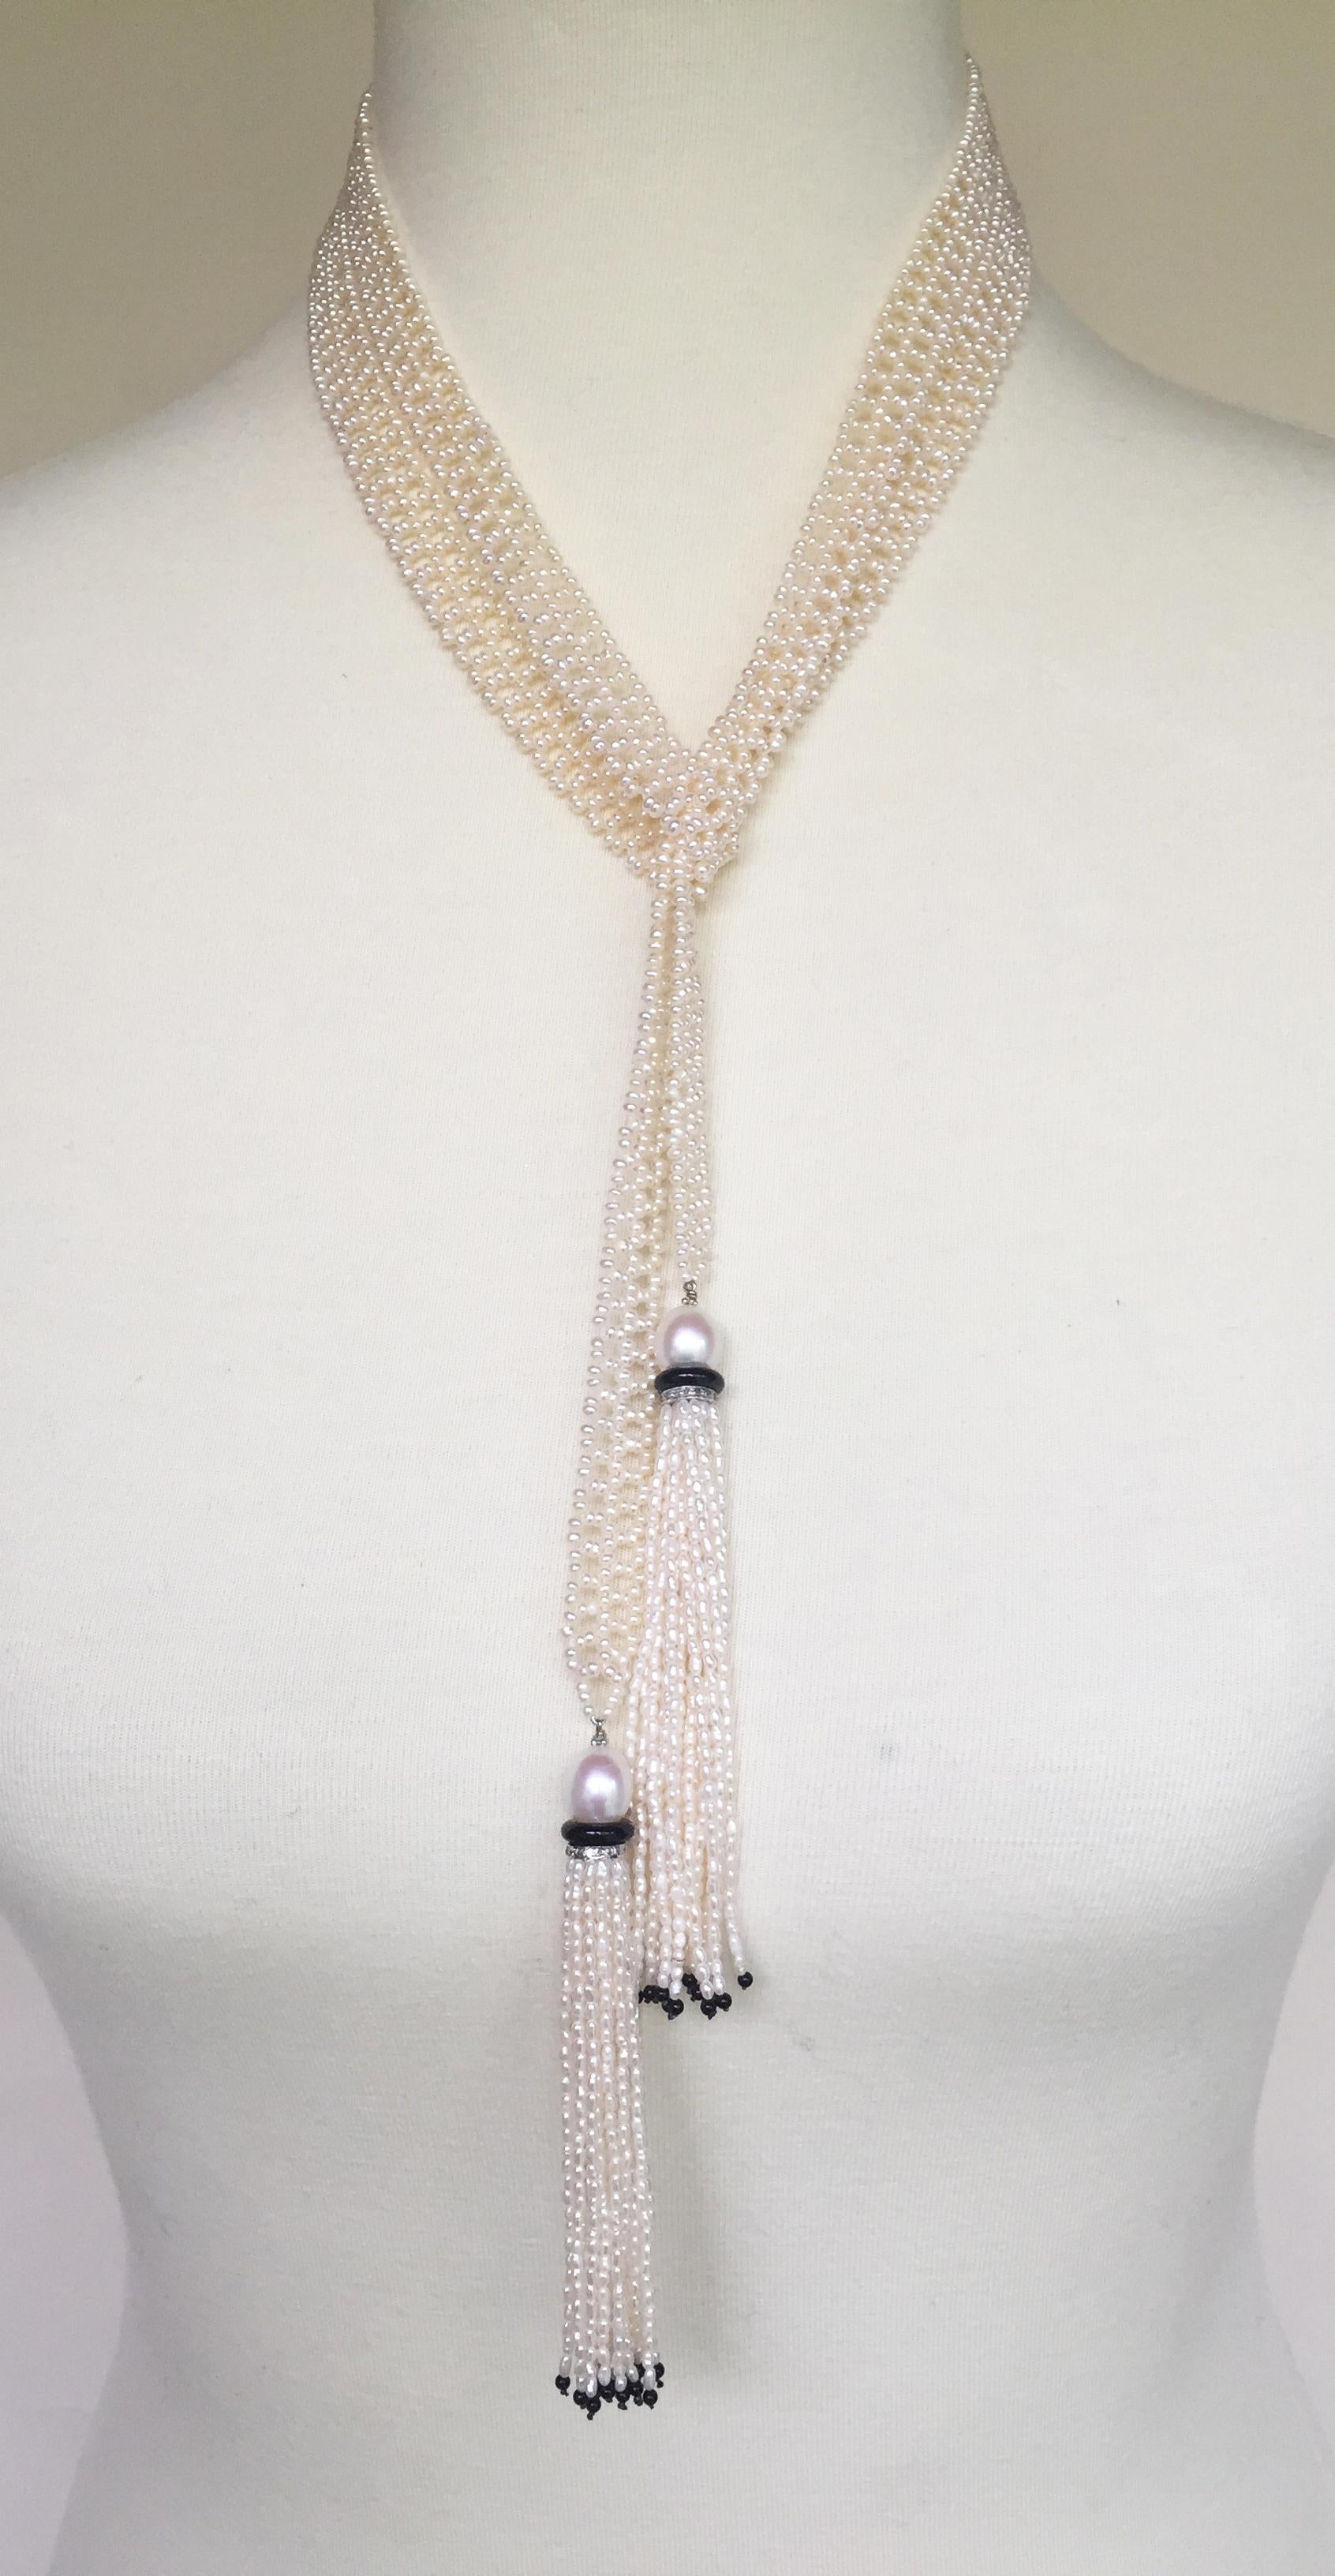 Women's Marina J. Woven Seed Pearl Sautoir Necklace with Pearl, Onyx and Diamond Tassels